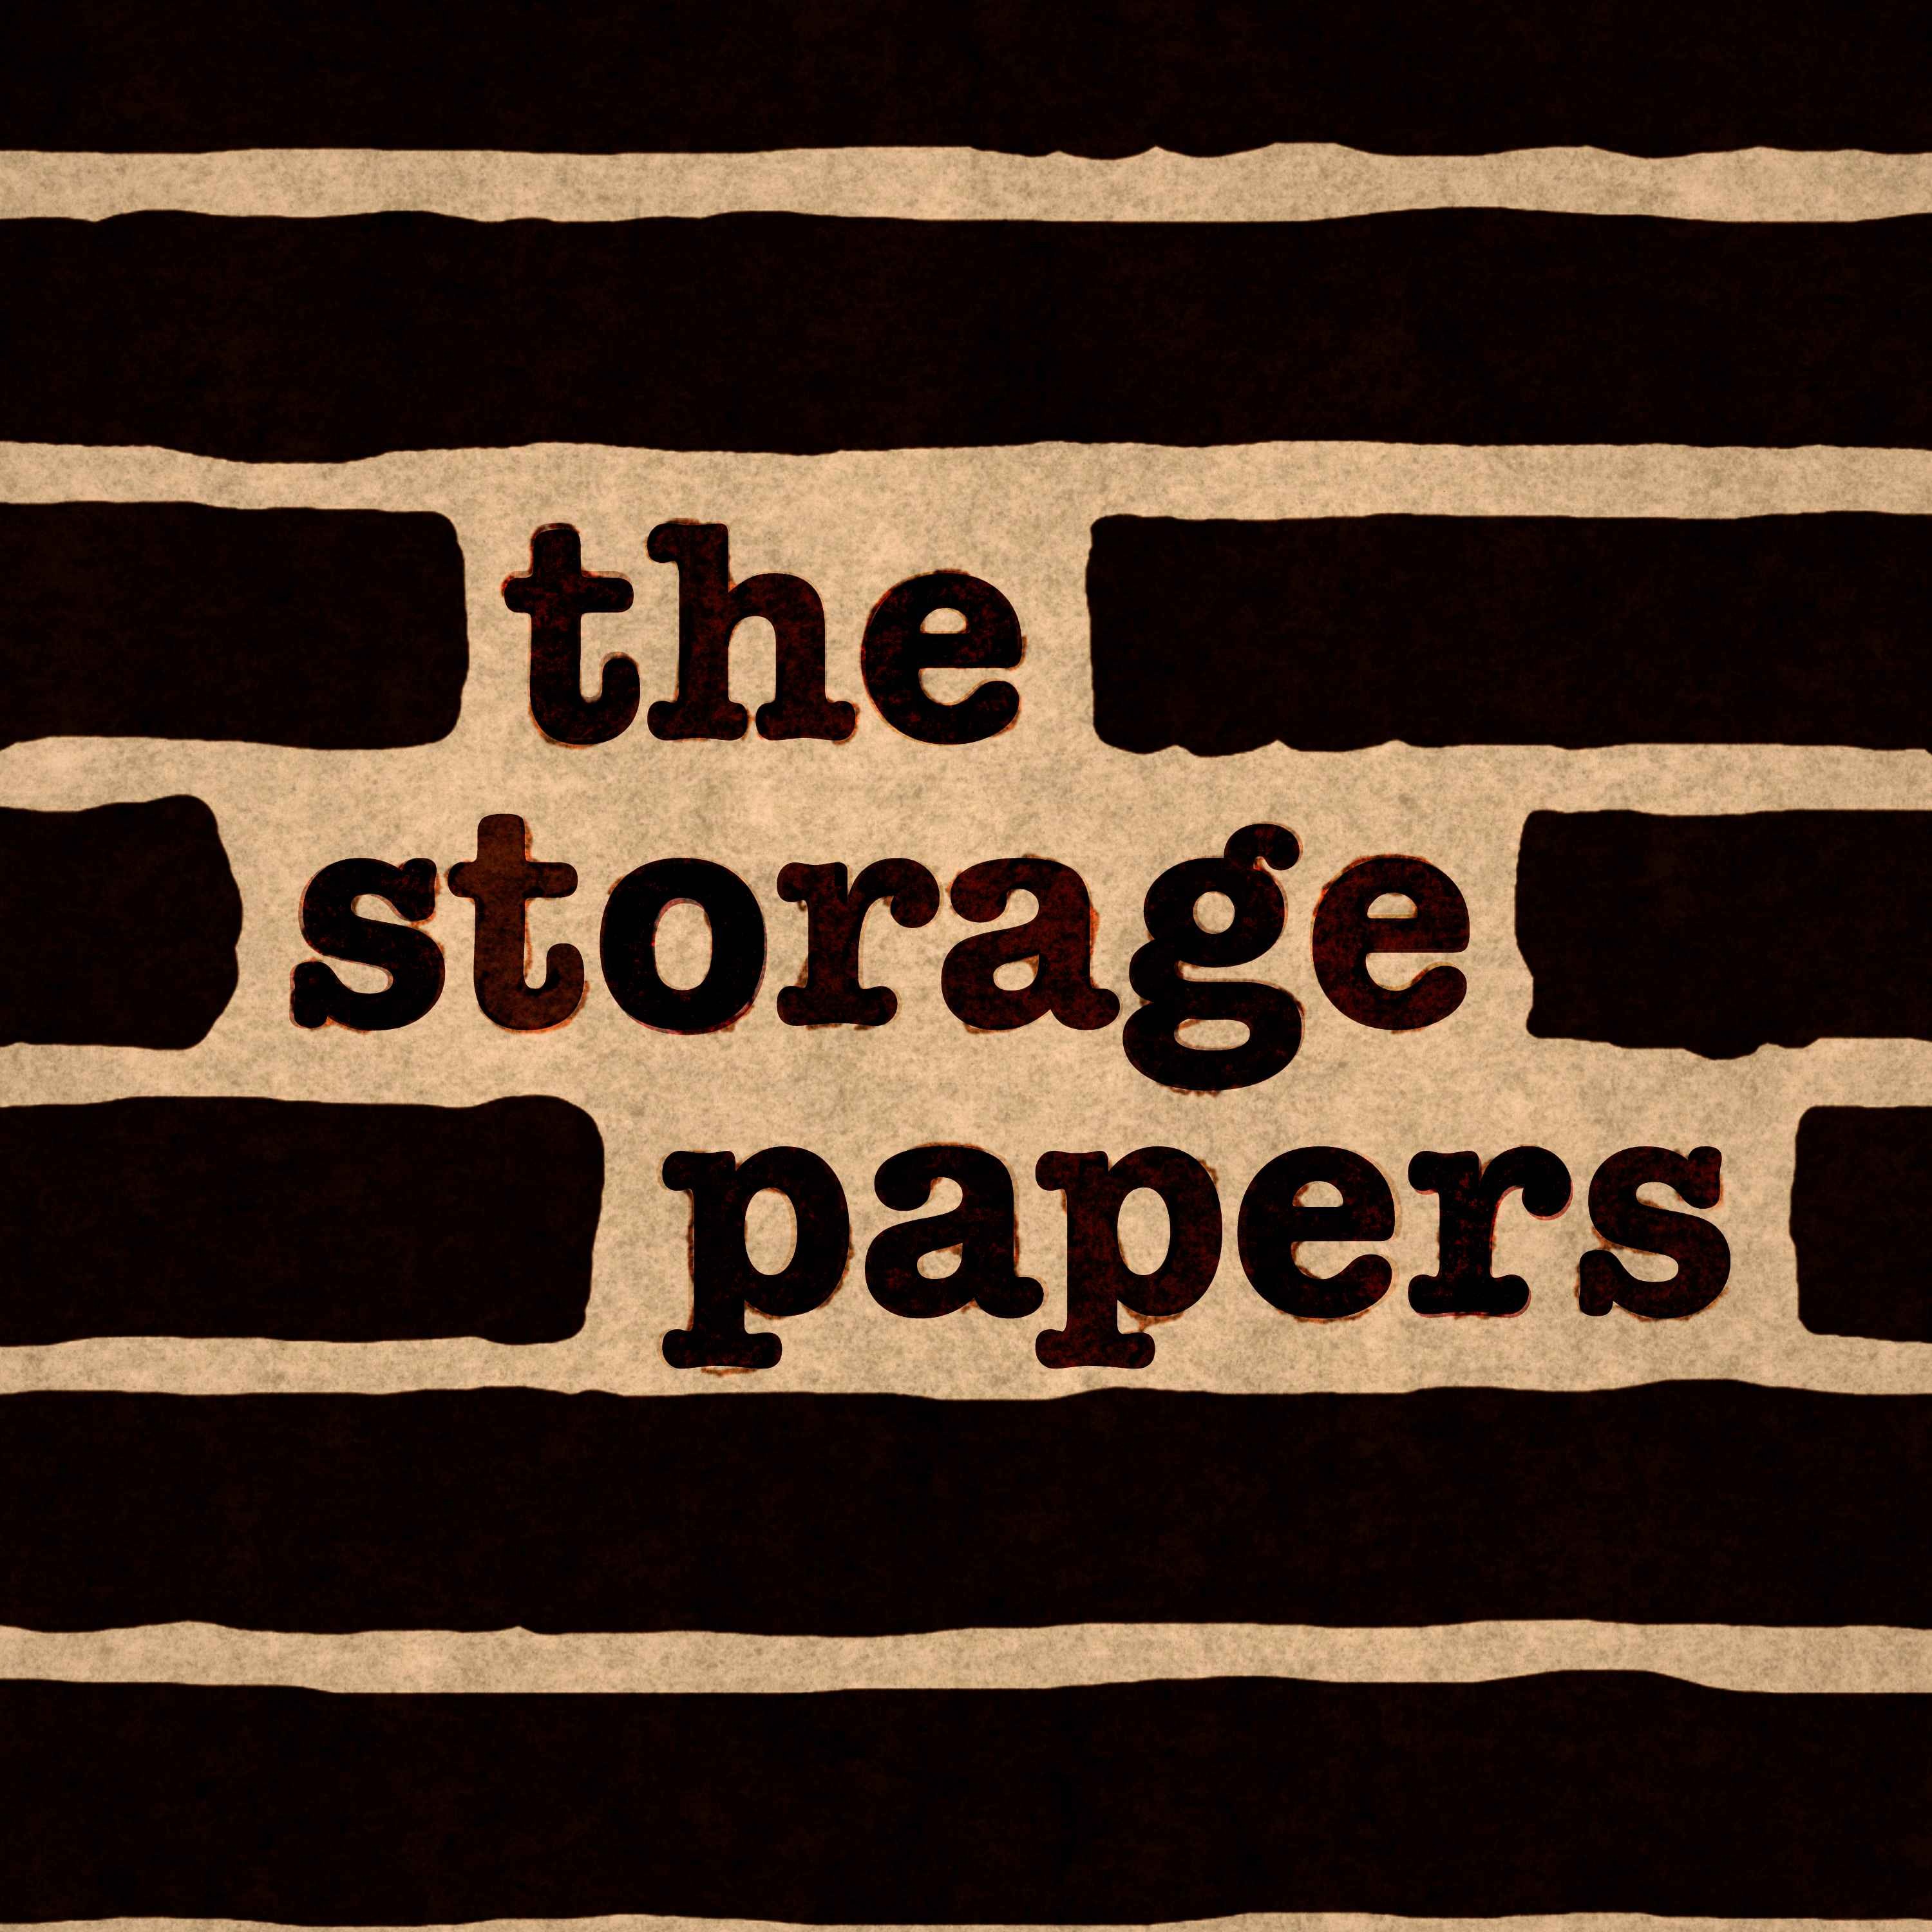 The Storage Papers